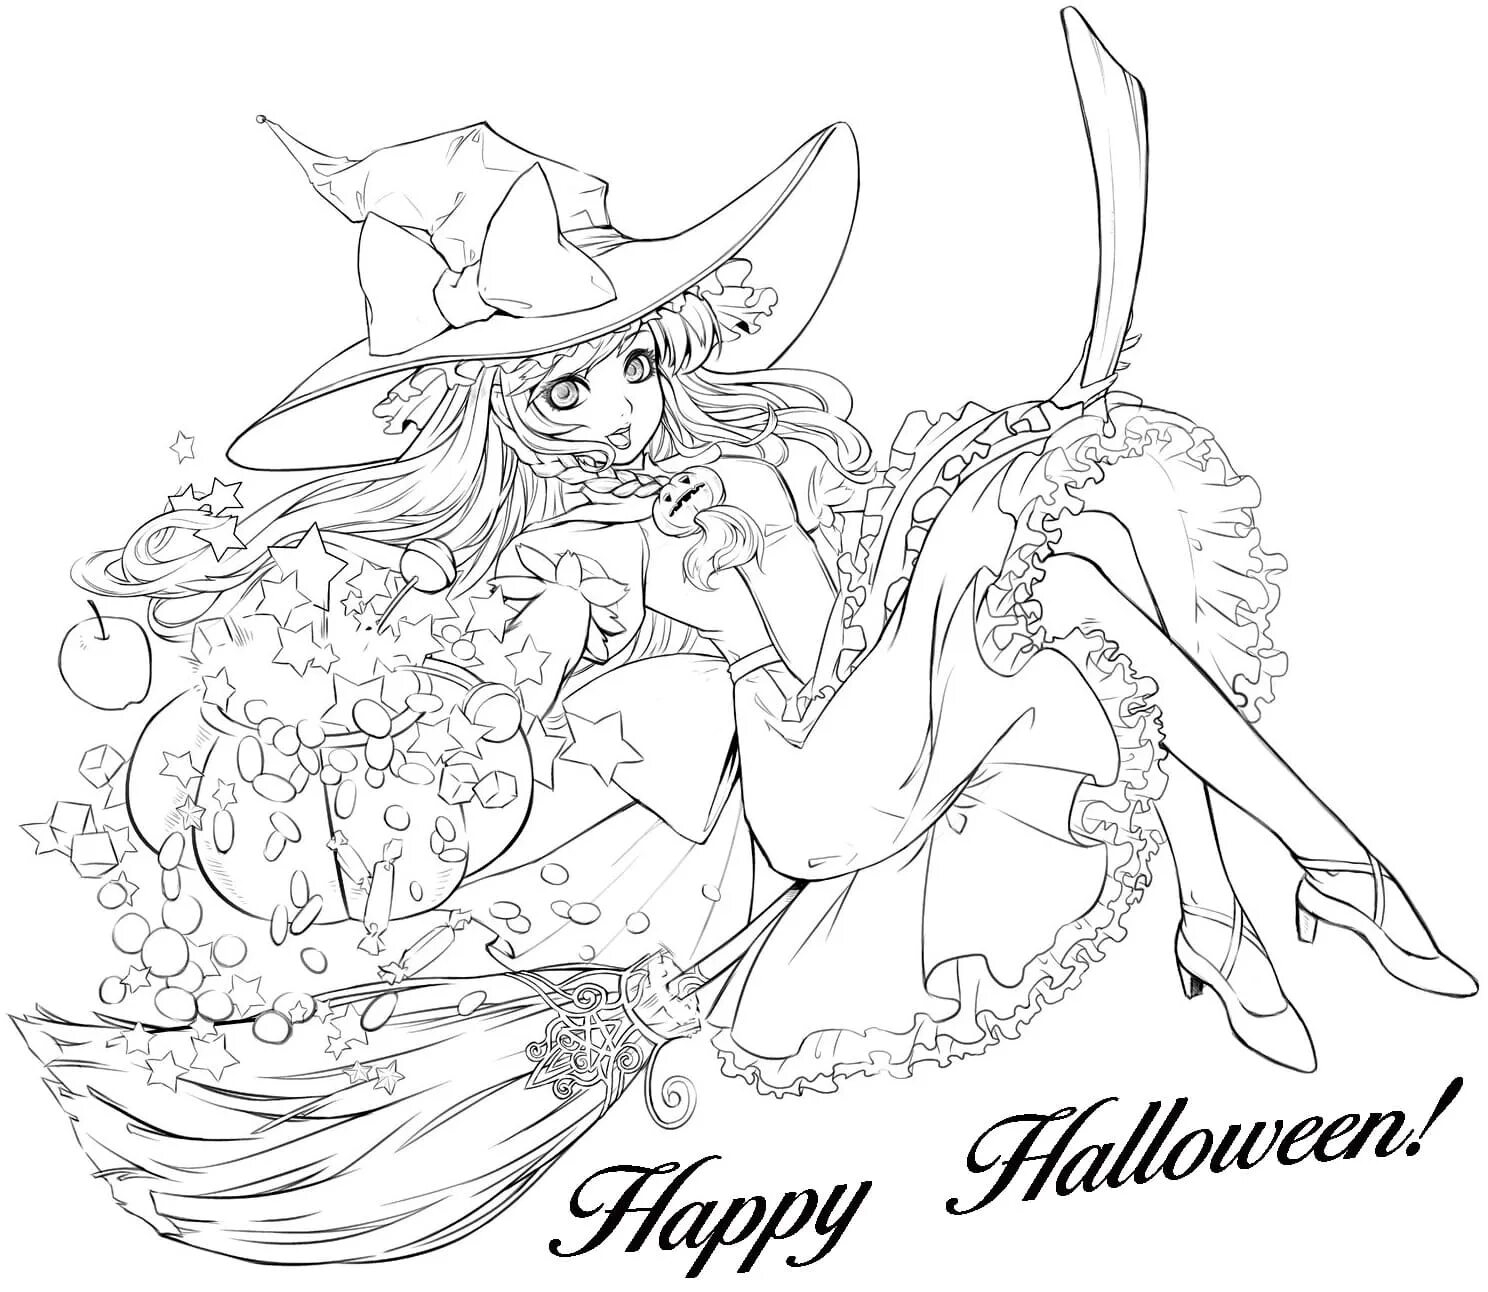 Colorful aya and witch coloring page